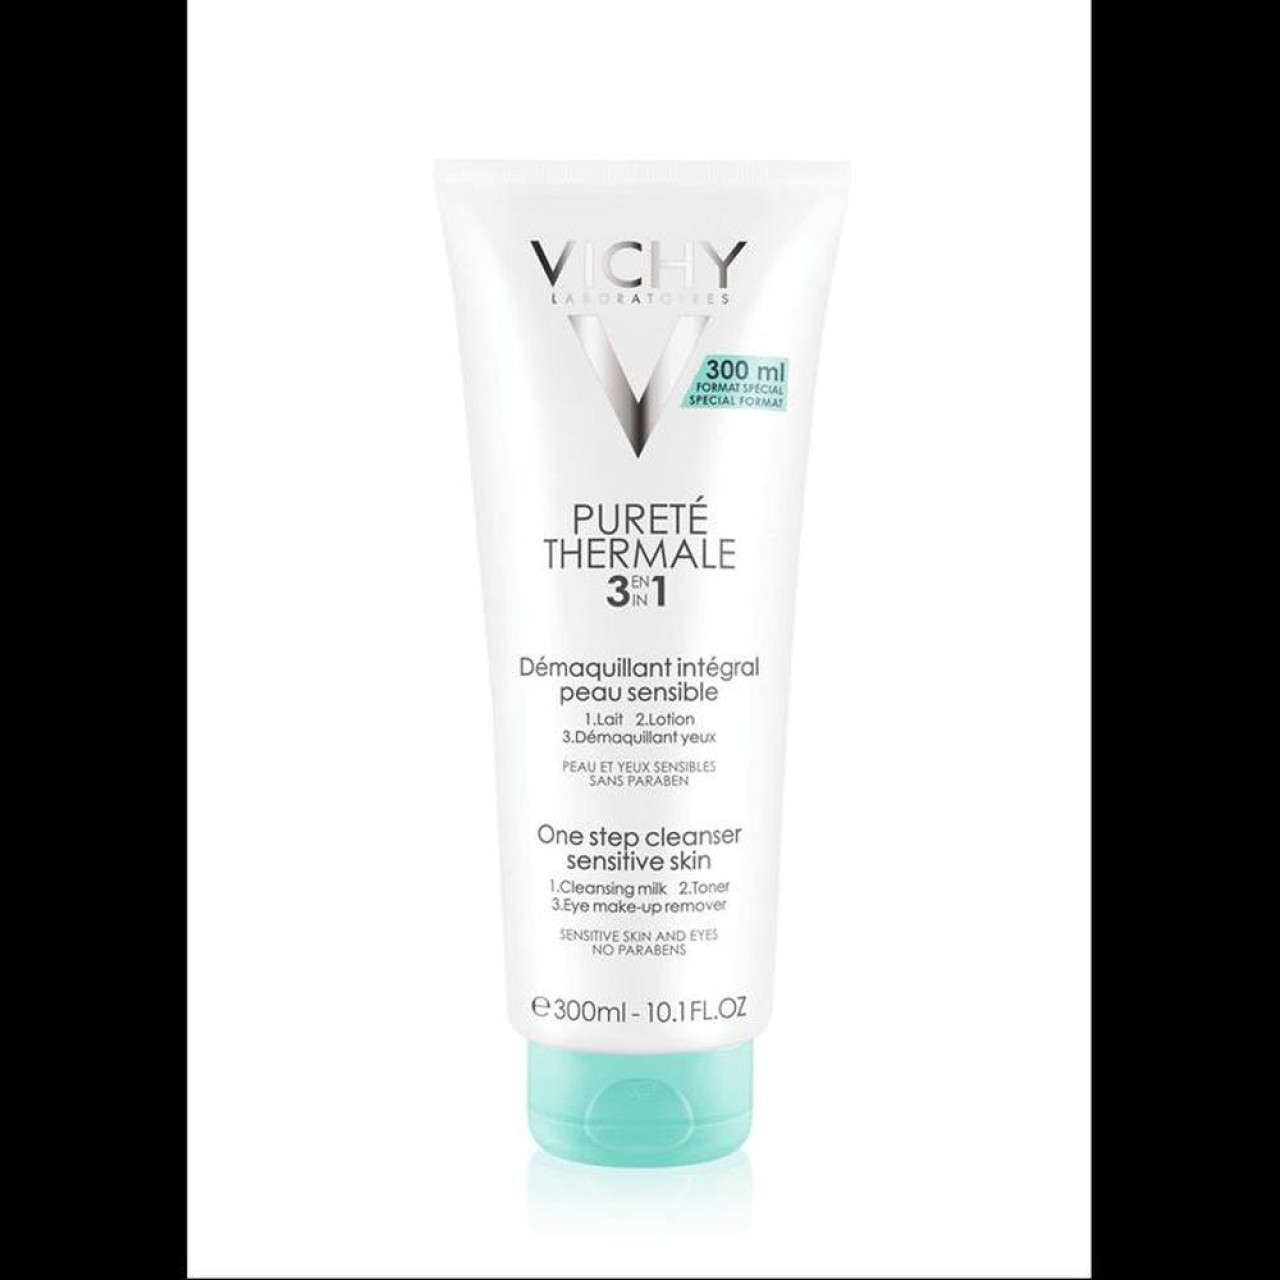 Vichy purete thermale makeup remover 3in1 300ml